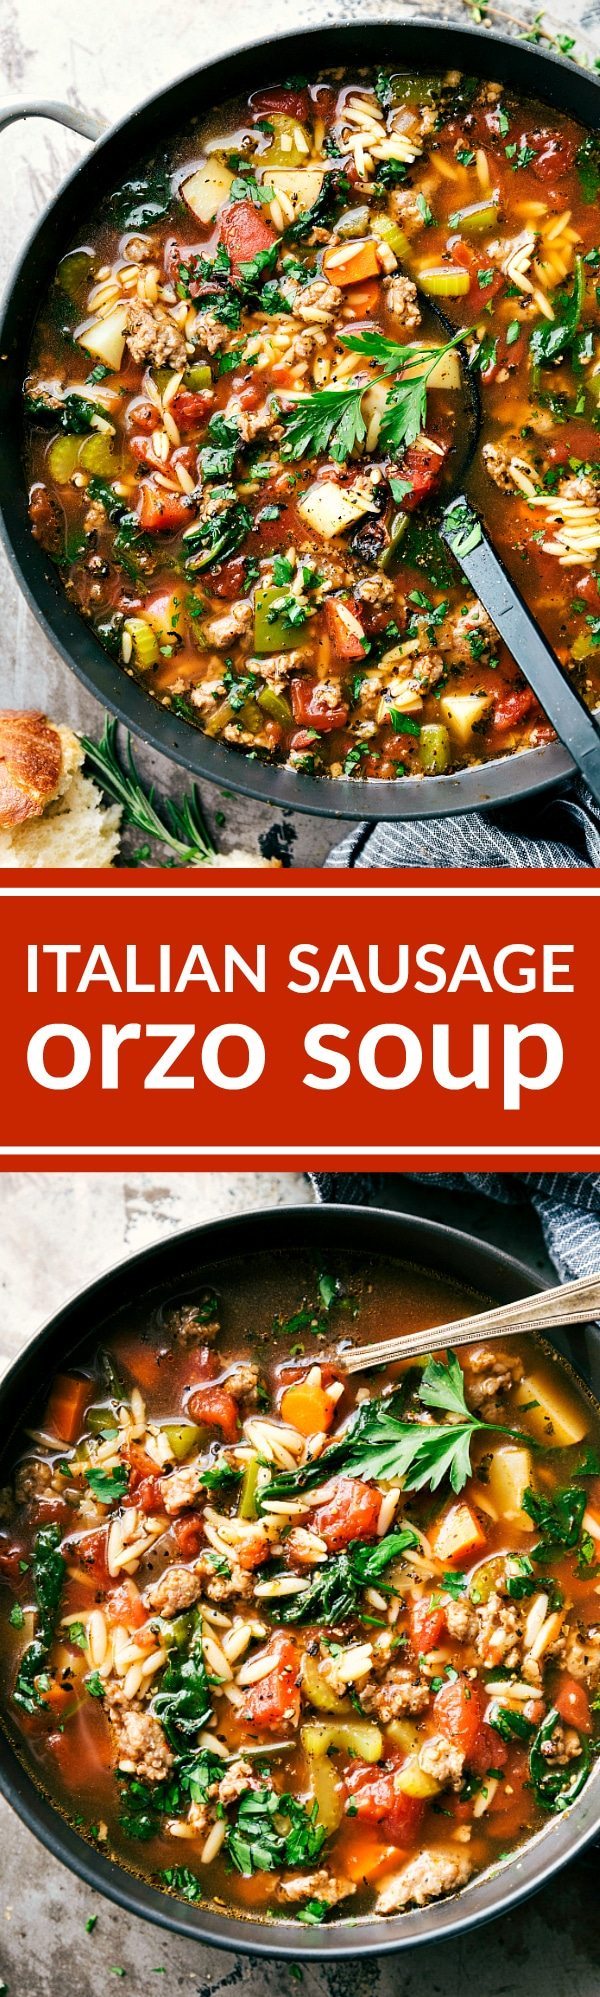 ITALIAN SAUSAGE ORZO SOUP! A delicious and simple to make Italian sausage soup with plenty of veggies (clear out your fridge!) and orzo pasta. via chelseasmessyapron.com